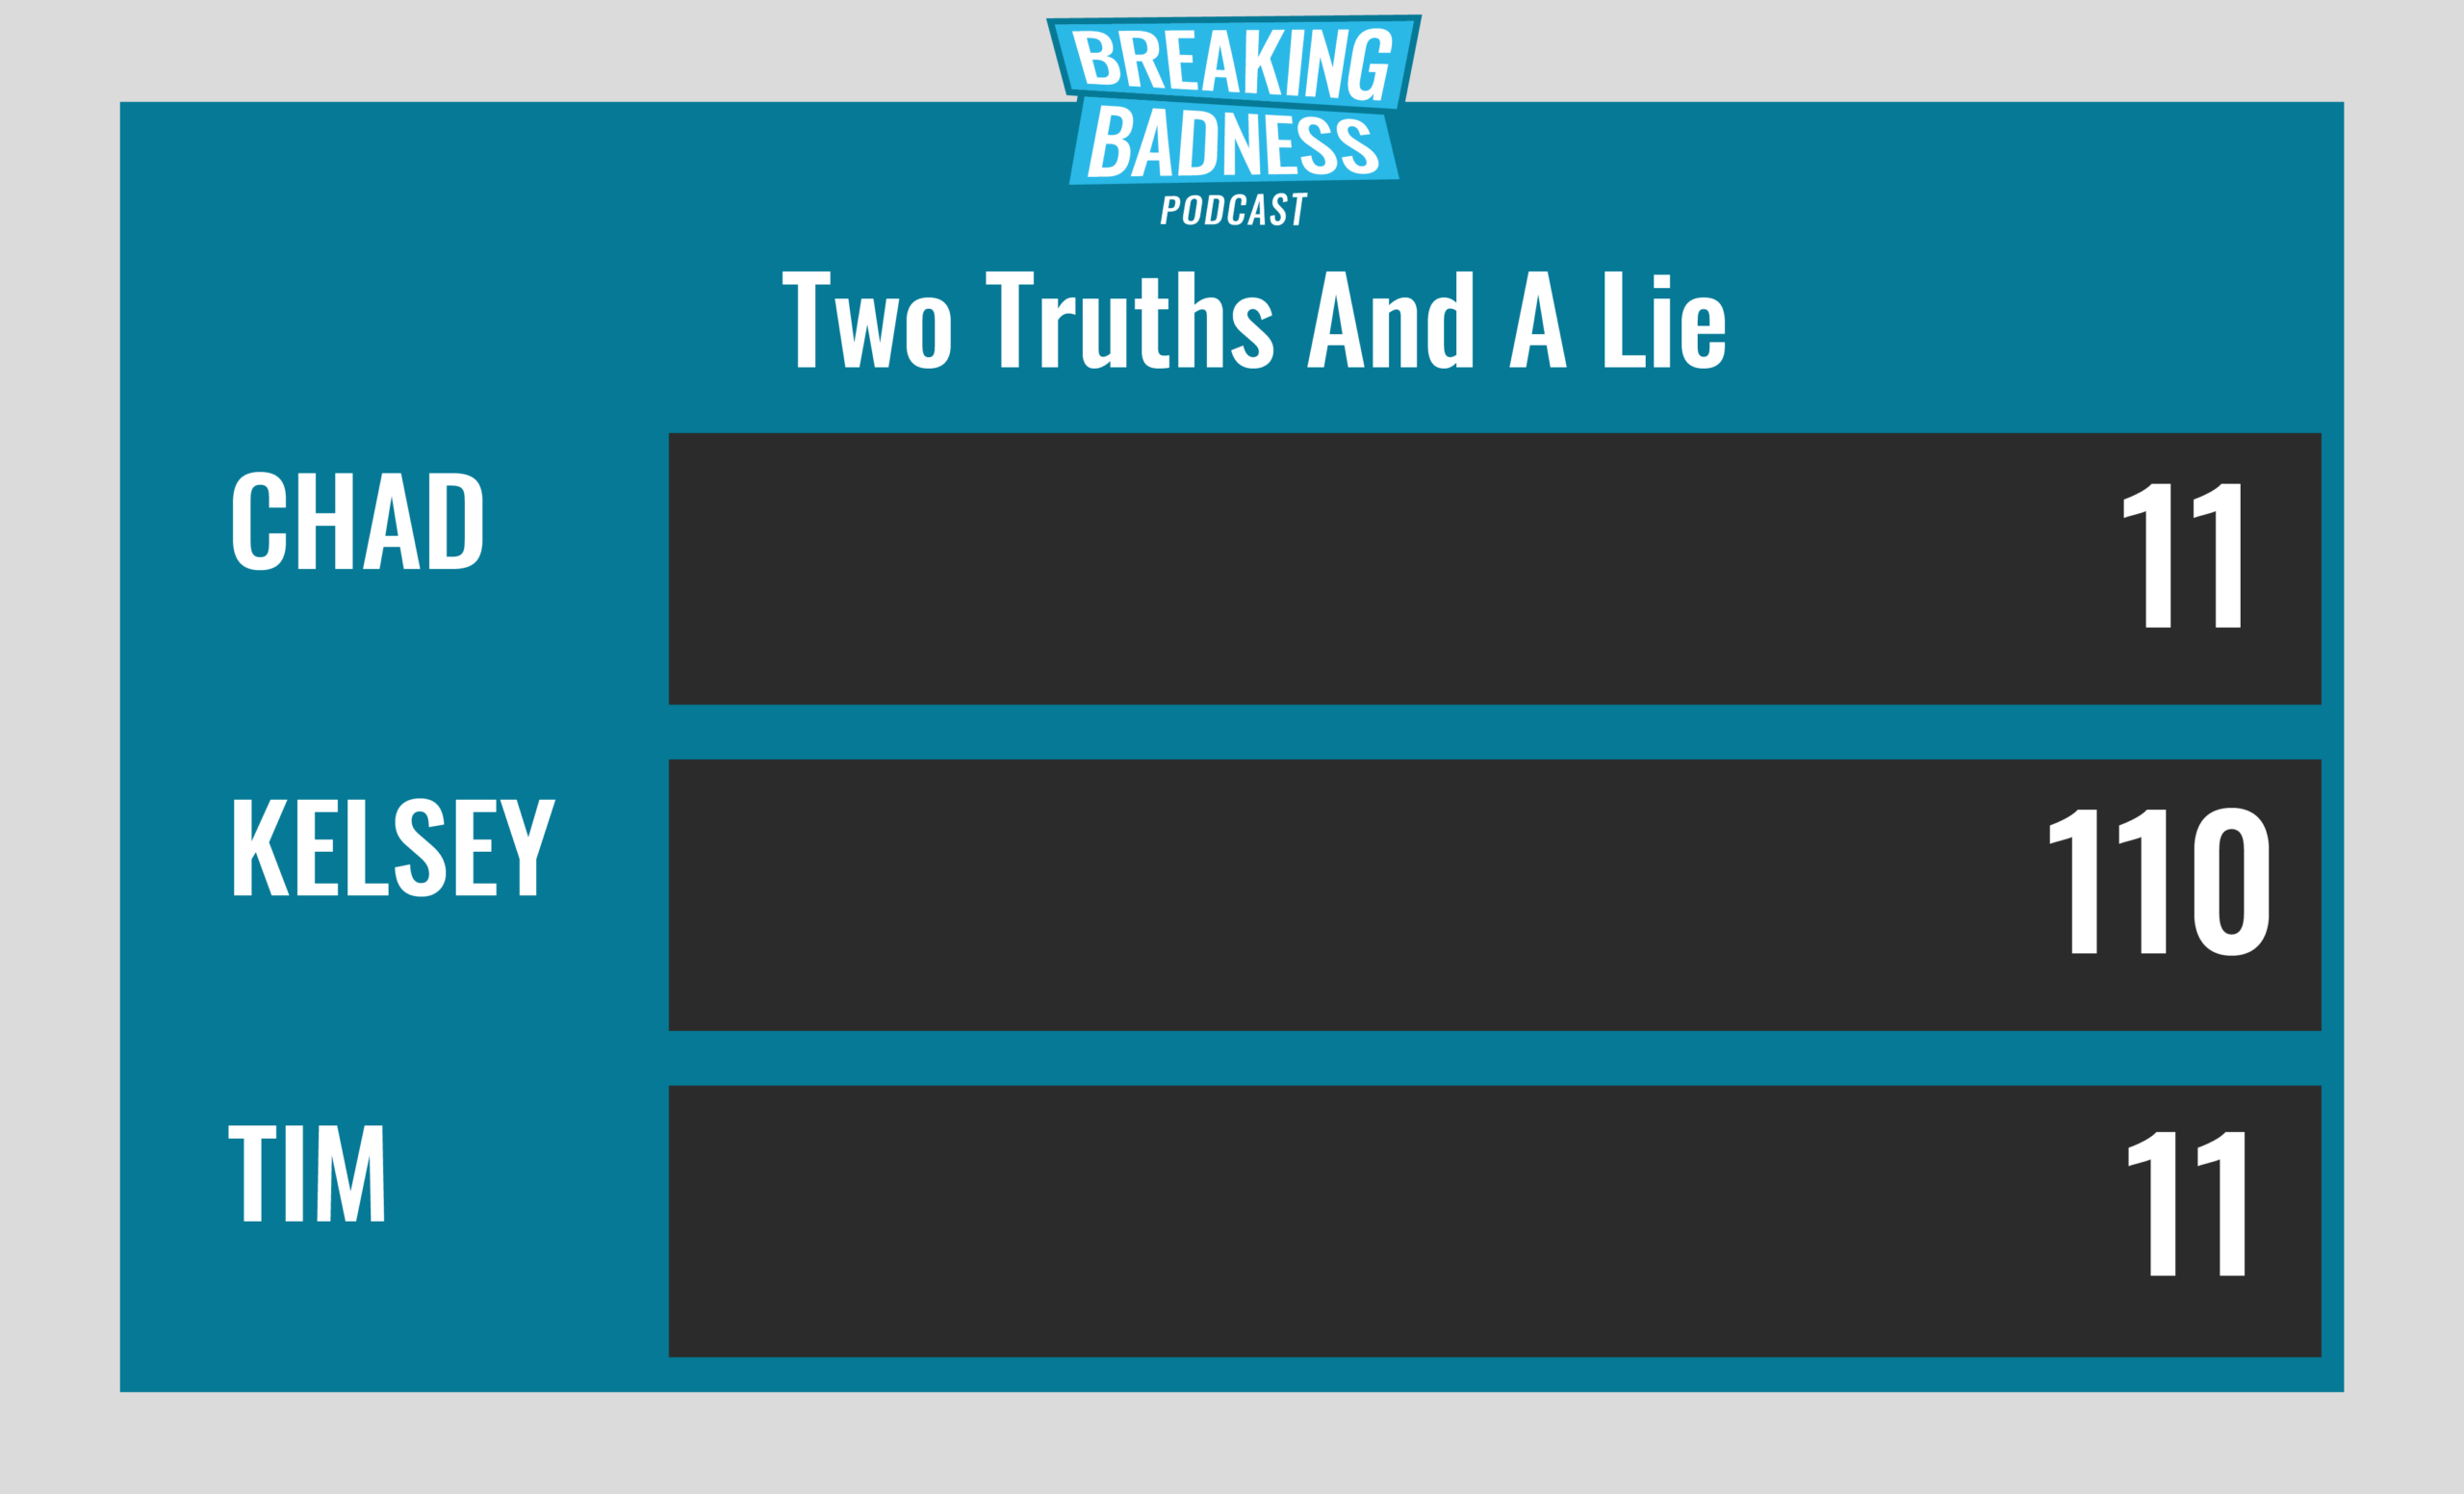 Breaking Badness Two Truths and a Lie